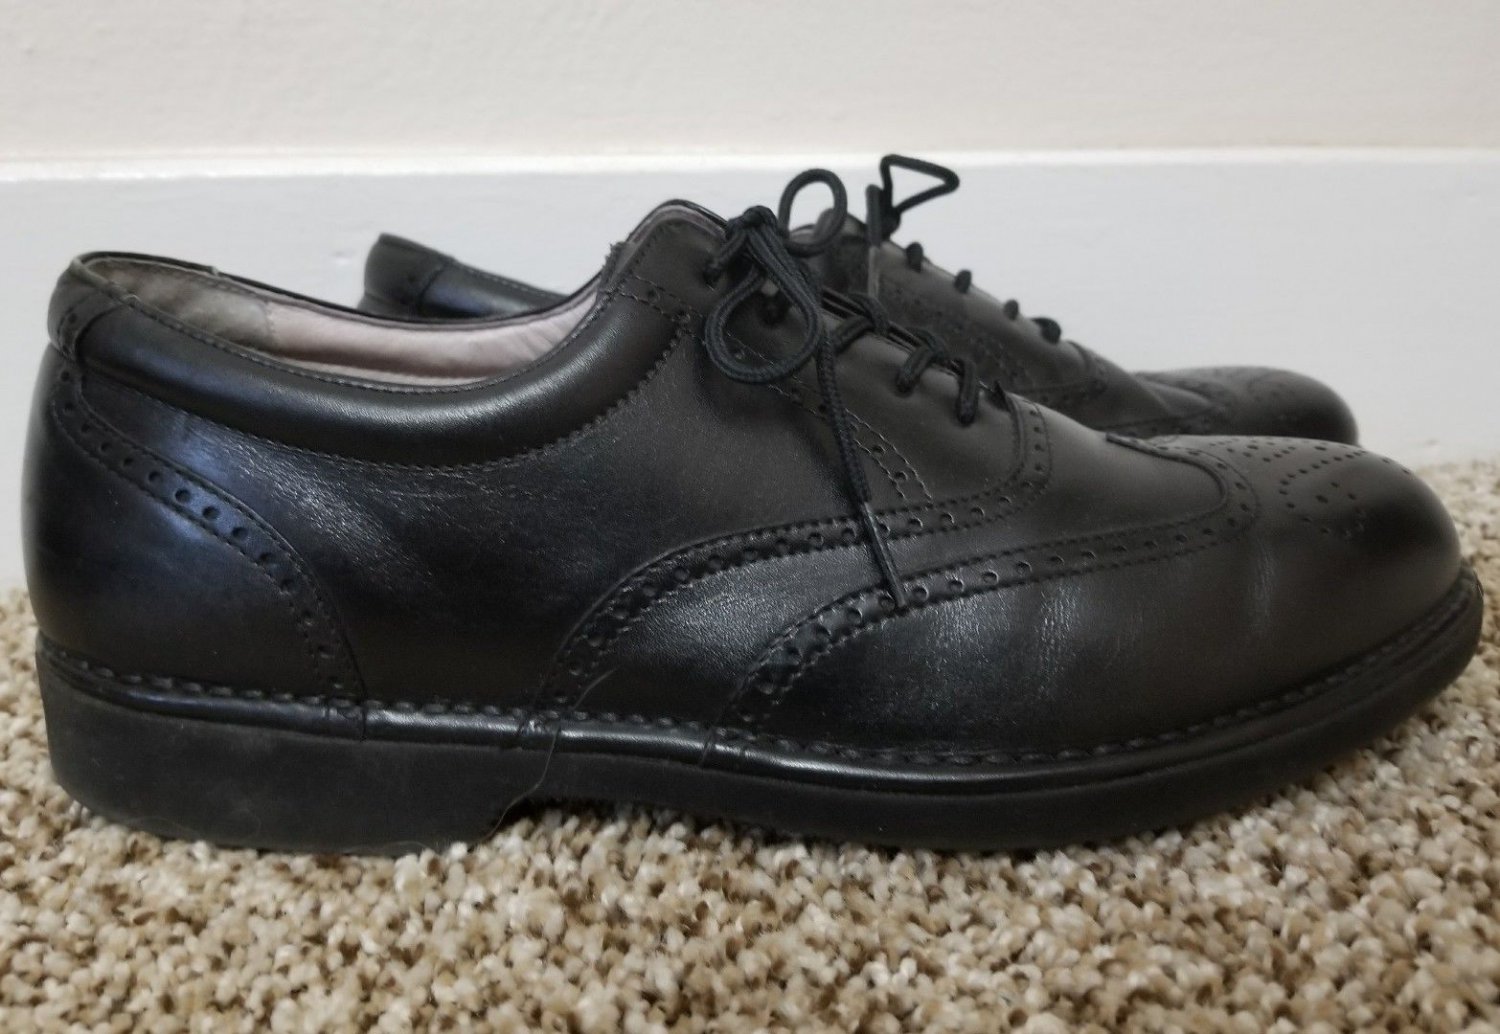 Dressports By Rockport Men's Black Leather Wingtip Dress Oxfords Shoes 8.5W